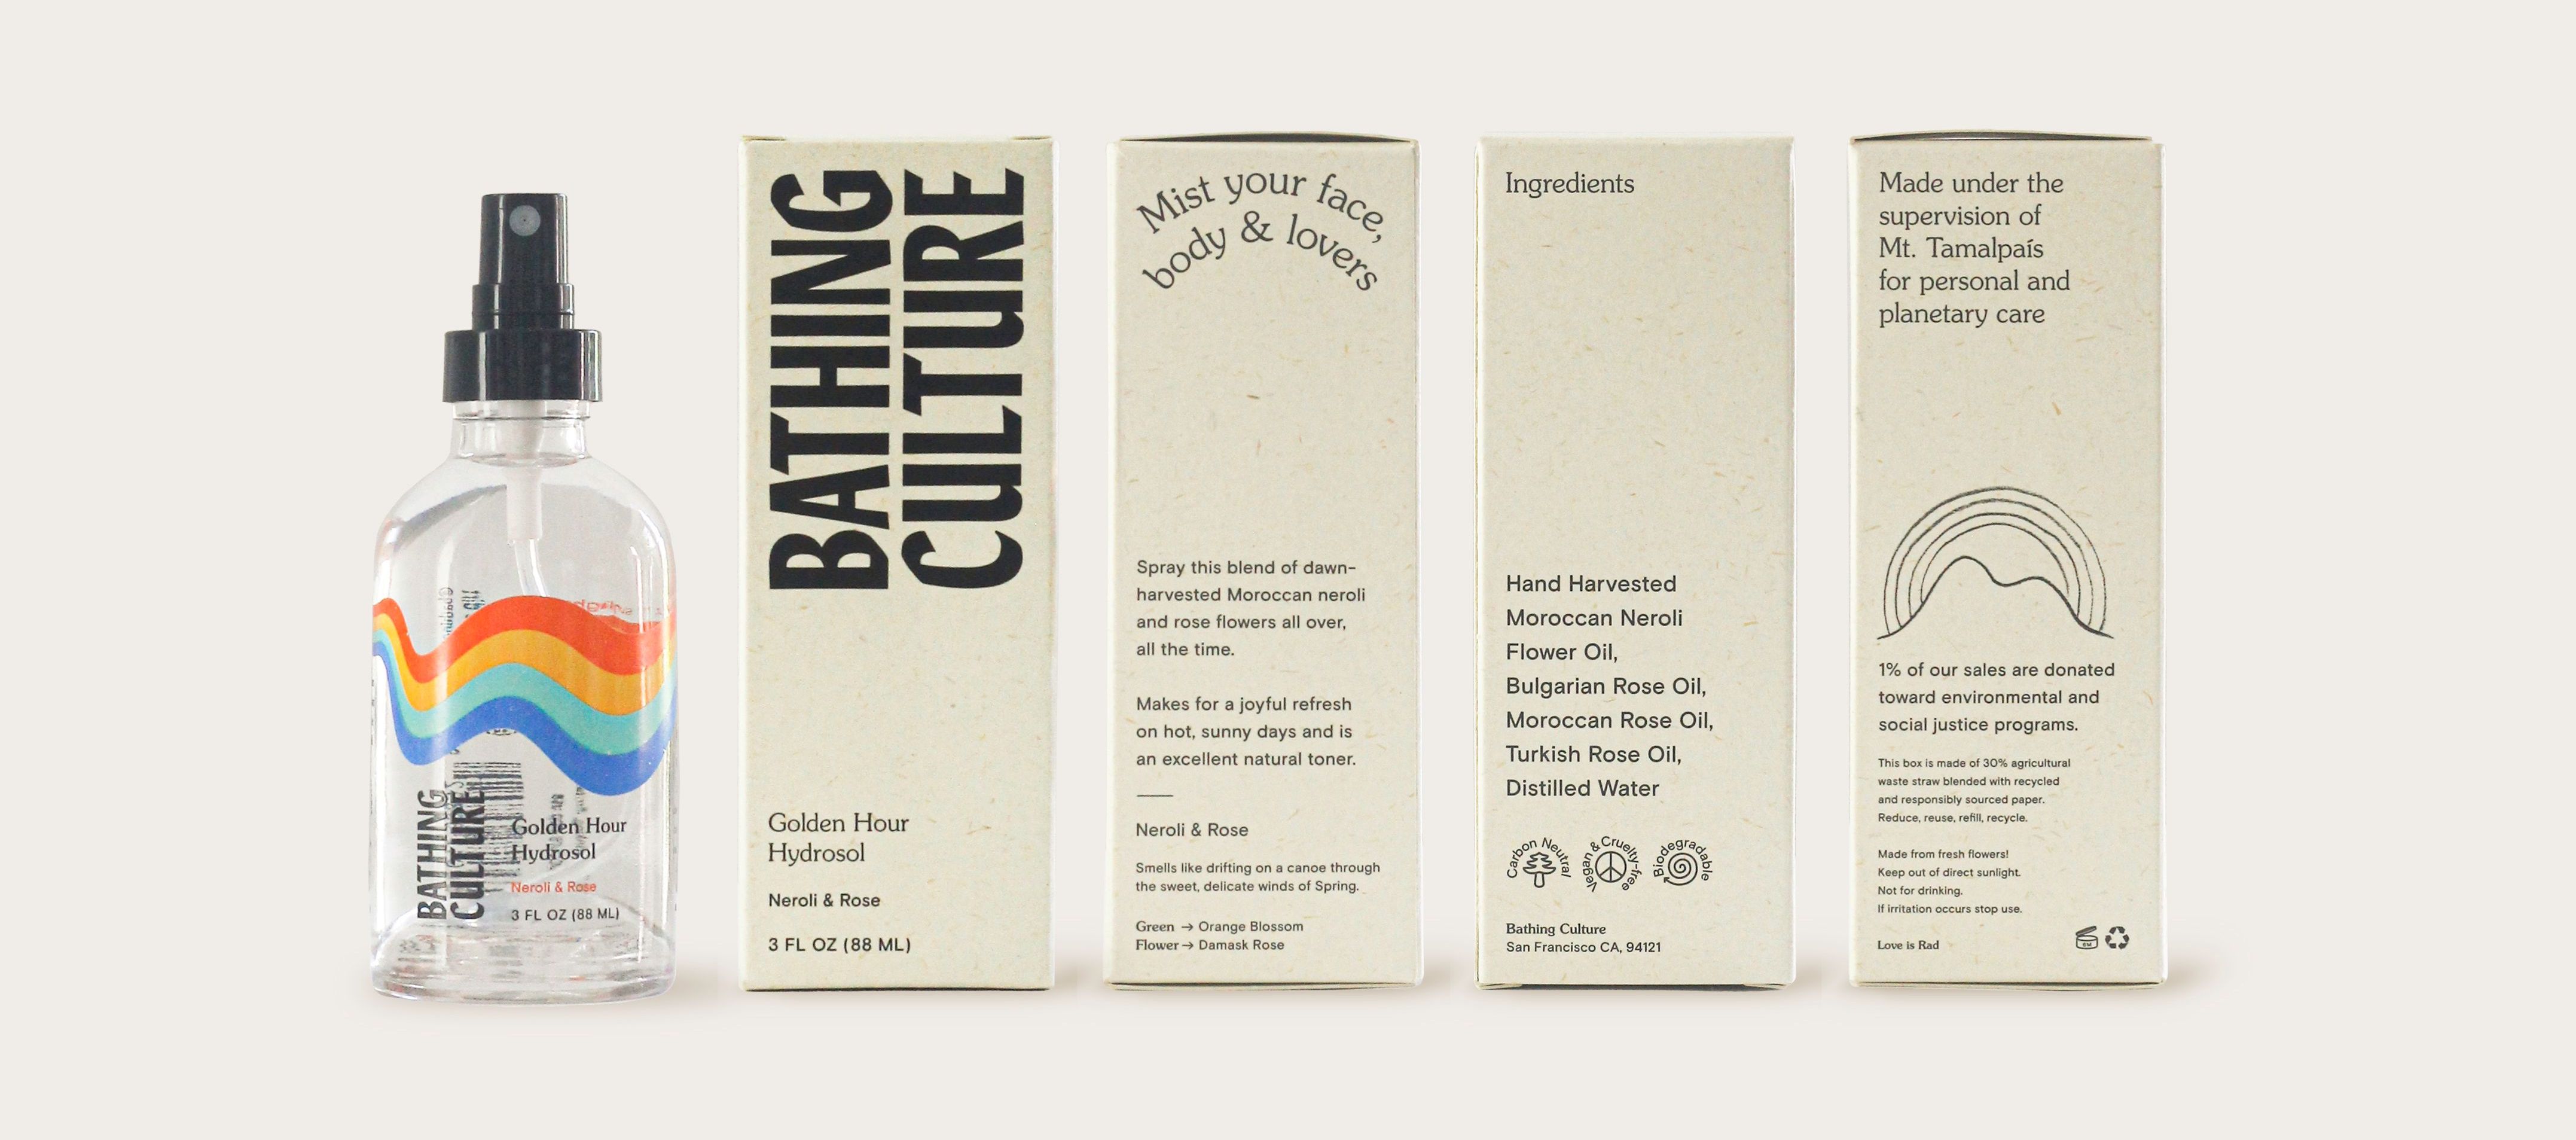 A Bathing Culture personal product next to four views of its box